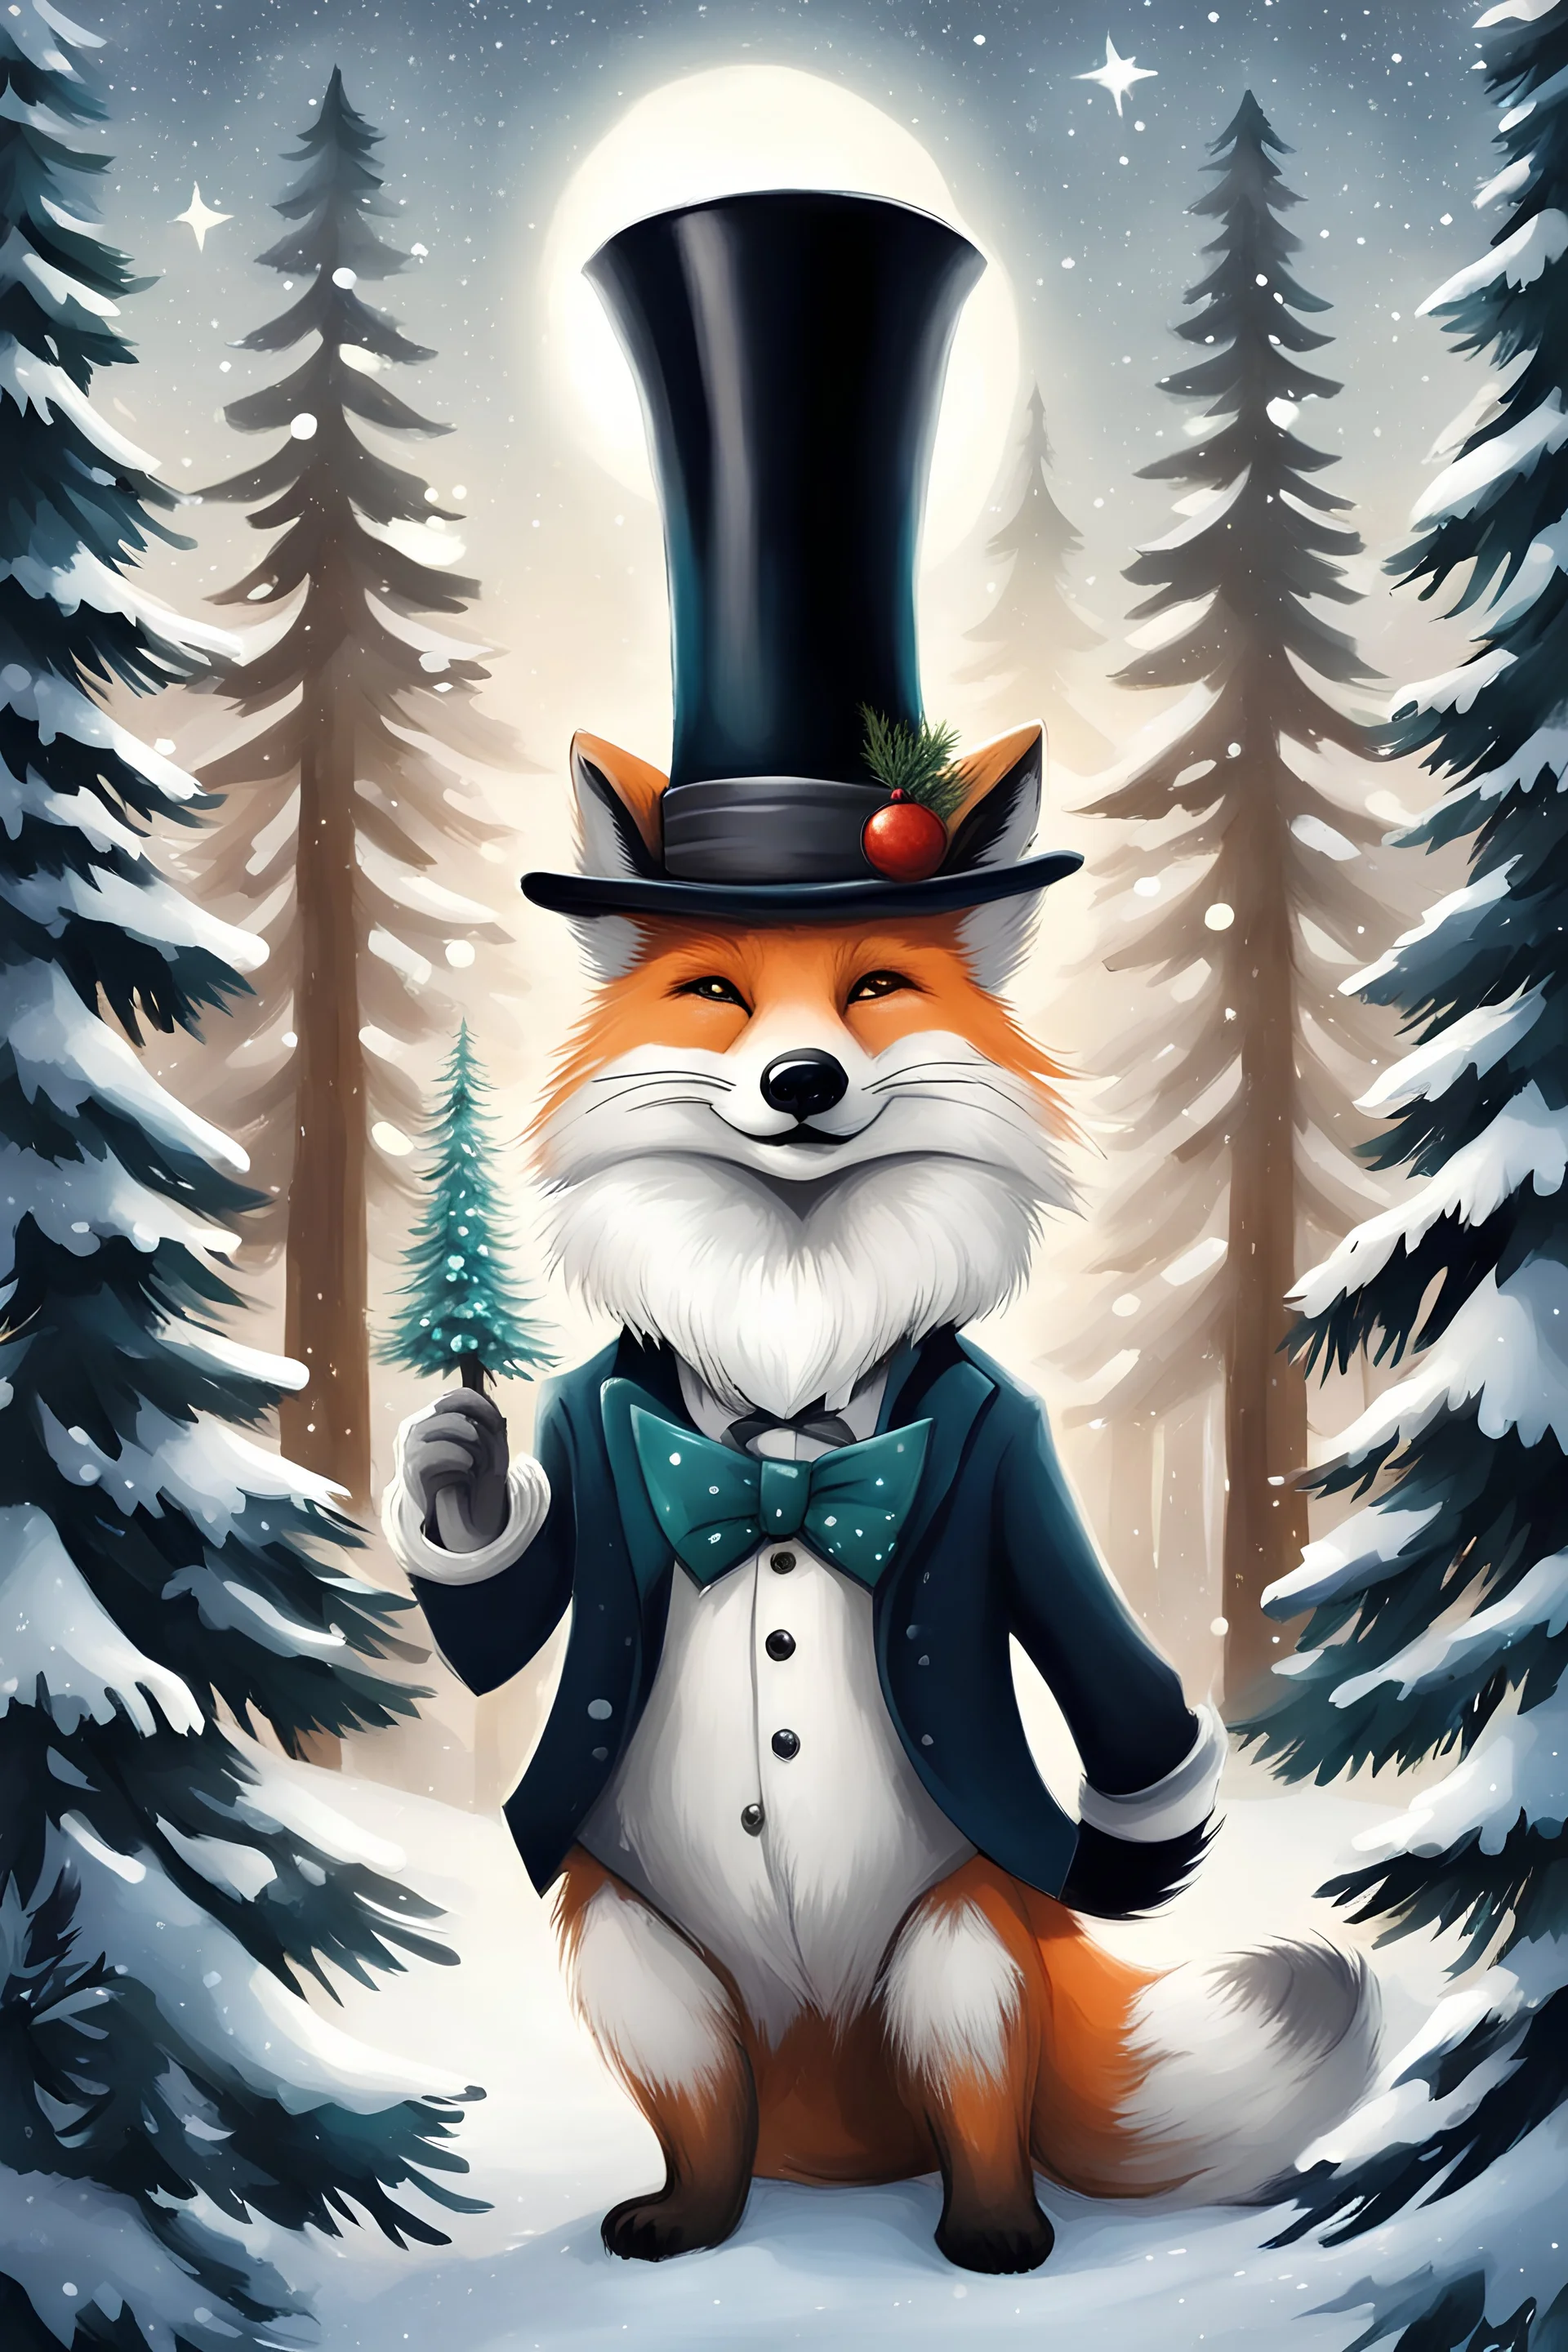 Cute fantasy white Christmas fox wearing a top hat; big pine trees all around; in the style of Brian Fround